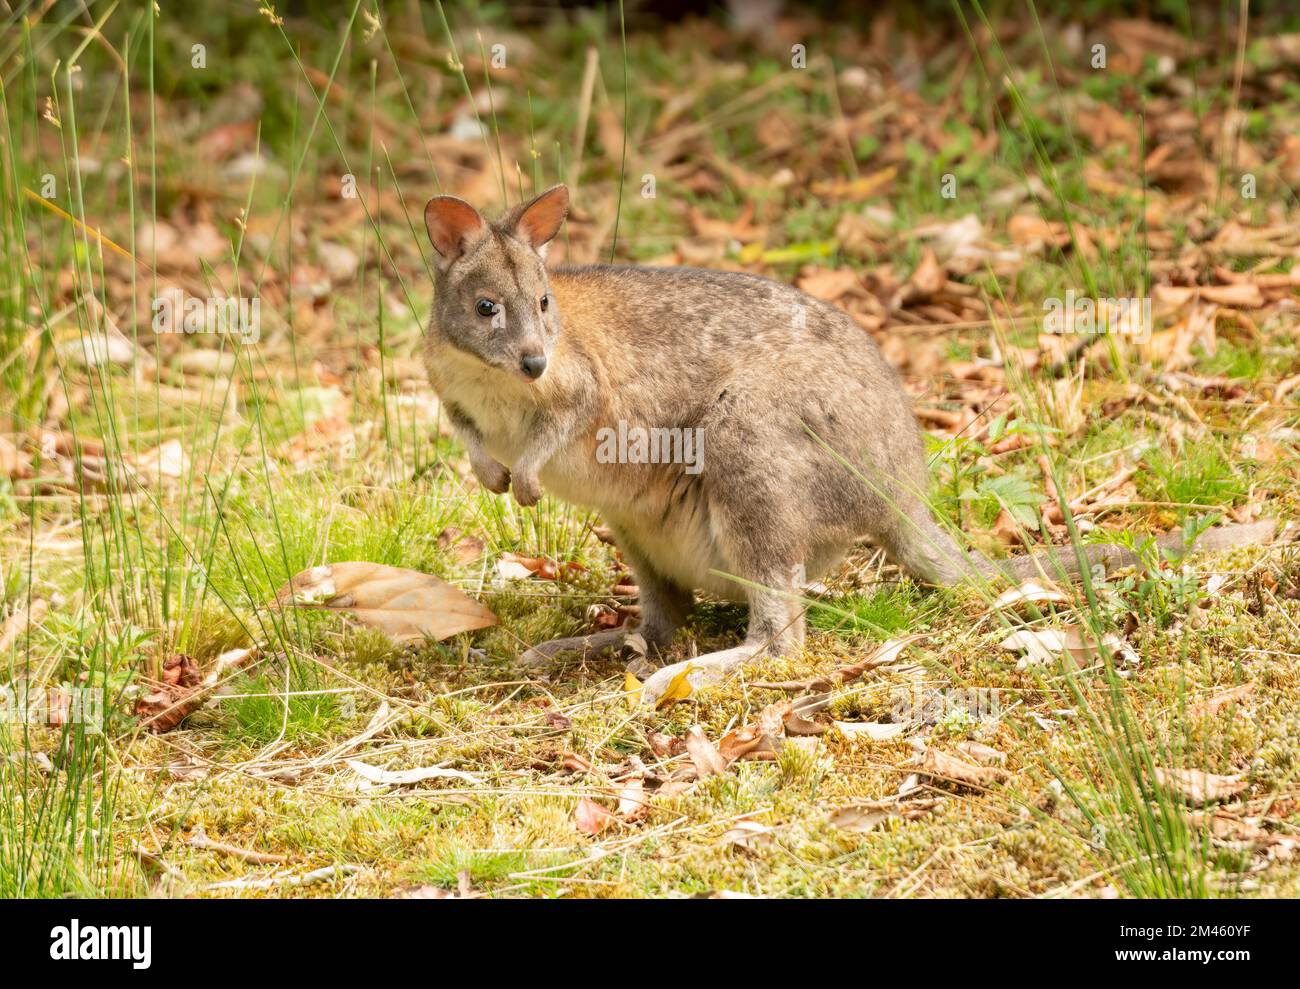 Pademelons are small, furry, hopping mammals in the genus Thylogale, found in Australia and New Guinea. Stock Photo